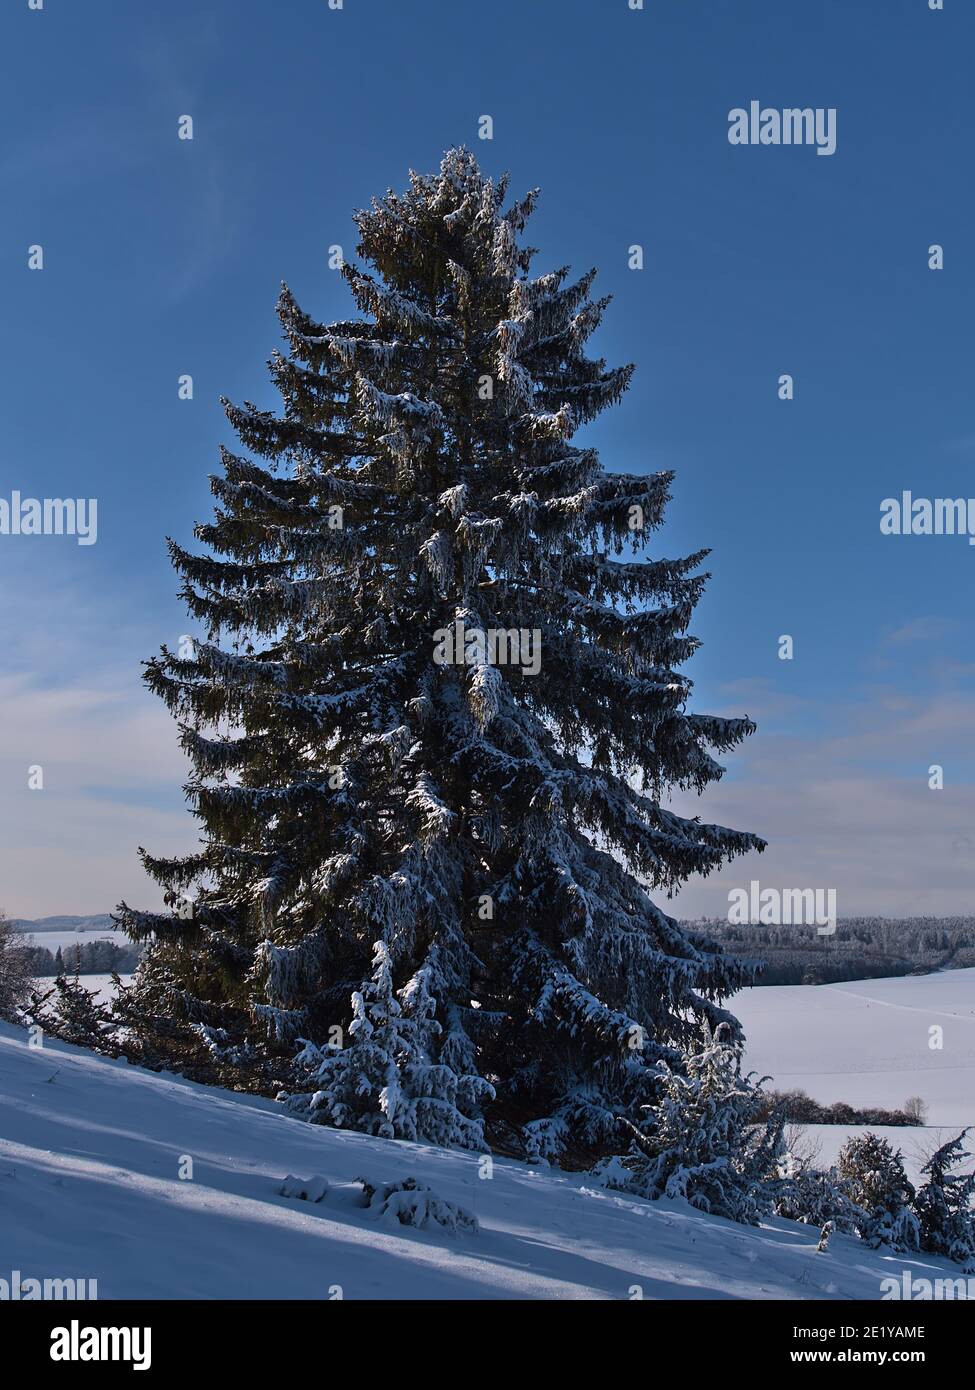 Portrait view of snow-covered coniferous tree in winter season with beautiful white pattern on the green branches in the shadows of the afternoon sun. Stock Photo